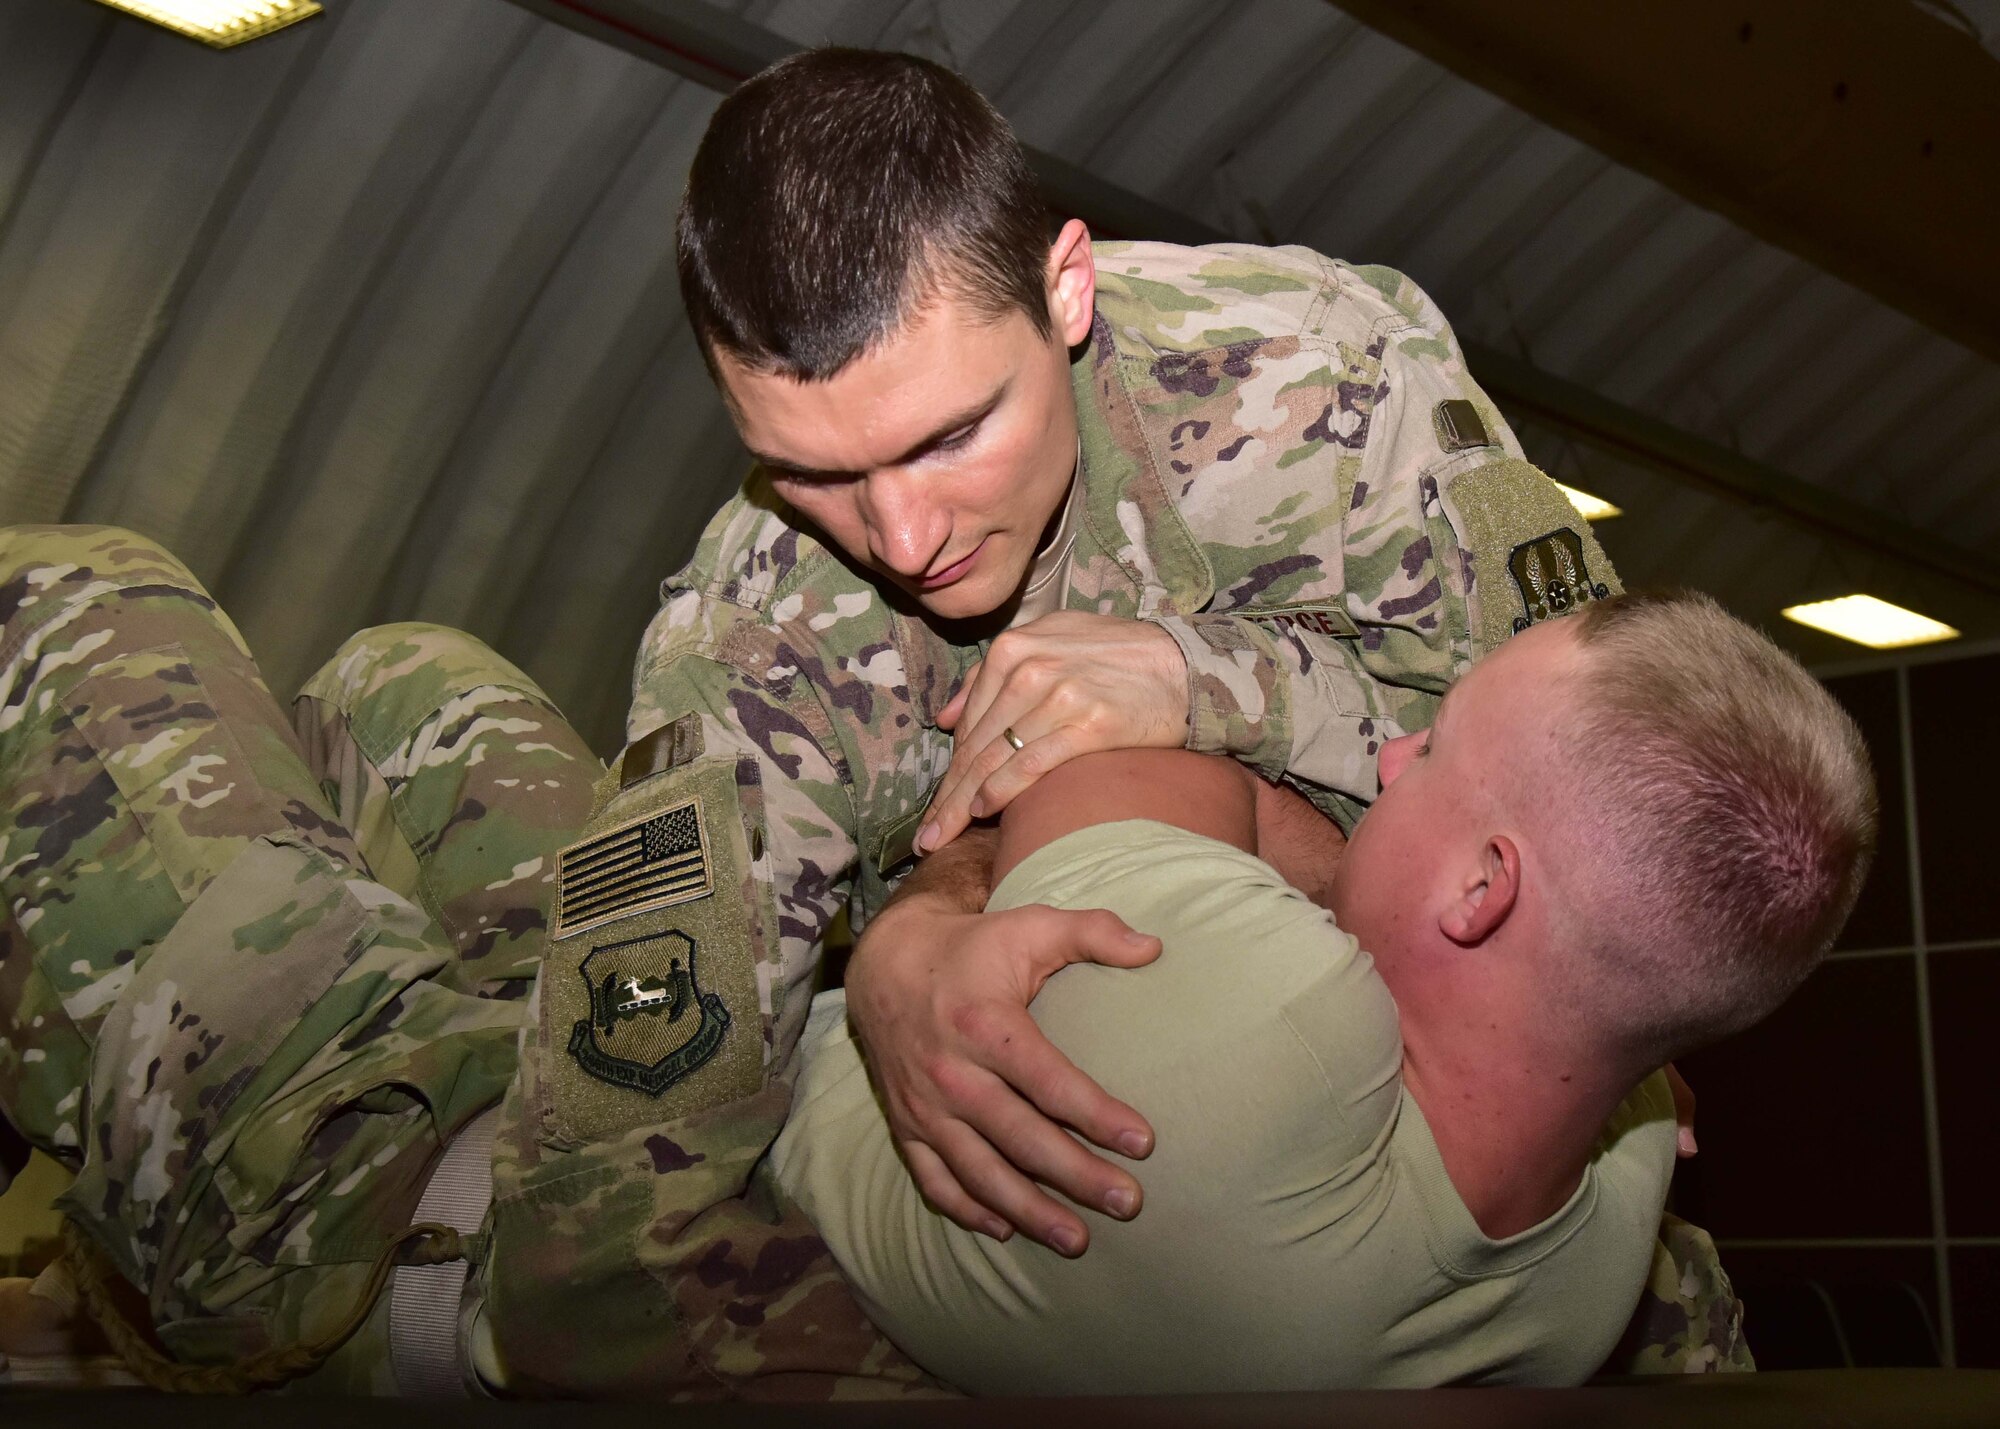 Capt. Eric Walter, 386th Expeditionary Medical Group physical therapy element chief, uses thoracic manipulation to treat Senior Airman Calvin Lourens, 386th Expeditionary Logistics Readiness Squadron passenger service specialist at an undisclosed location in Southwest Asia, Dec. 7, 2017. (U.S. Air Force photo by Tech. Sgt. Louis Vega Jr.)